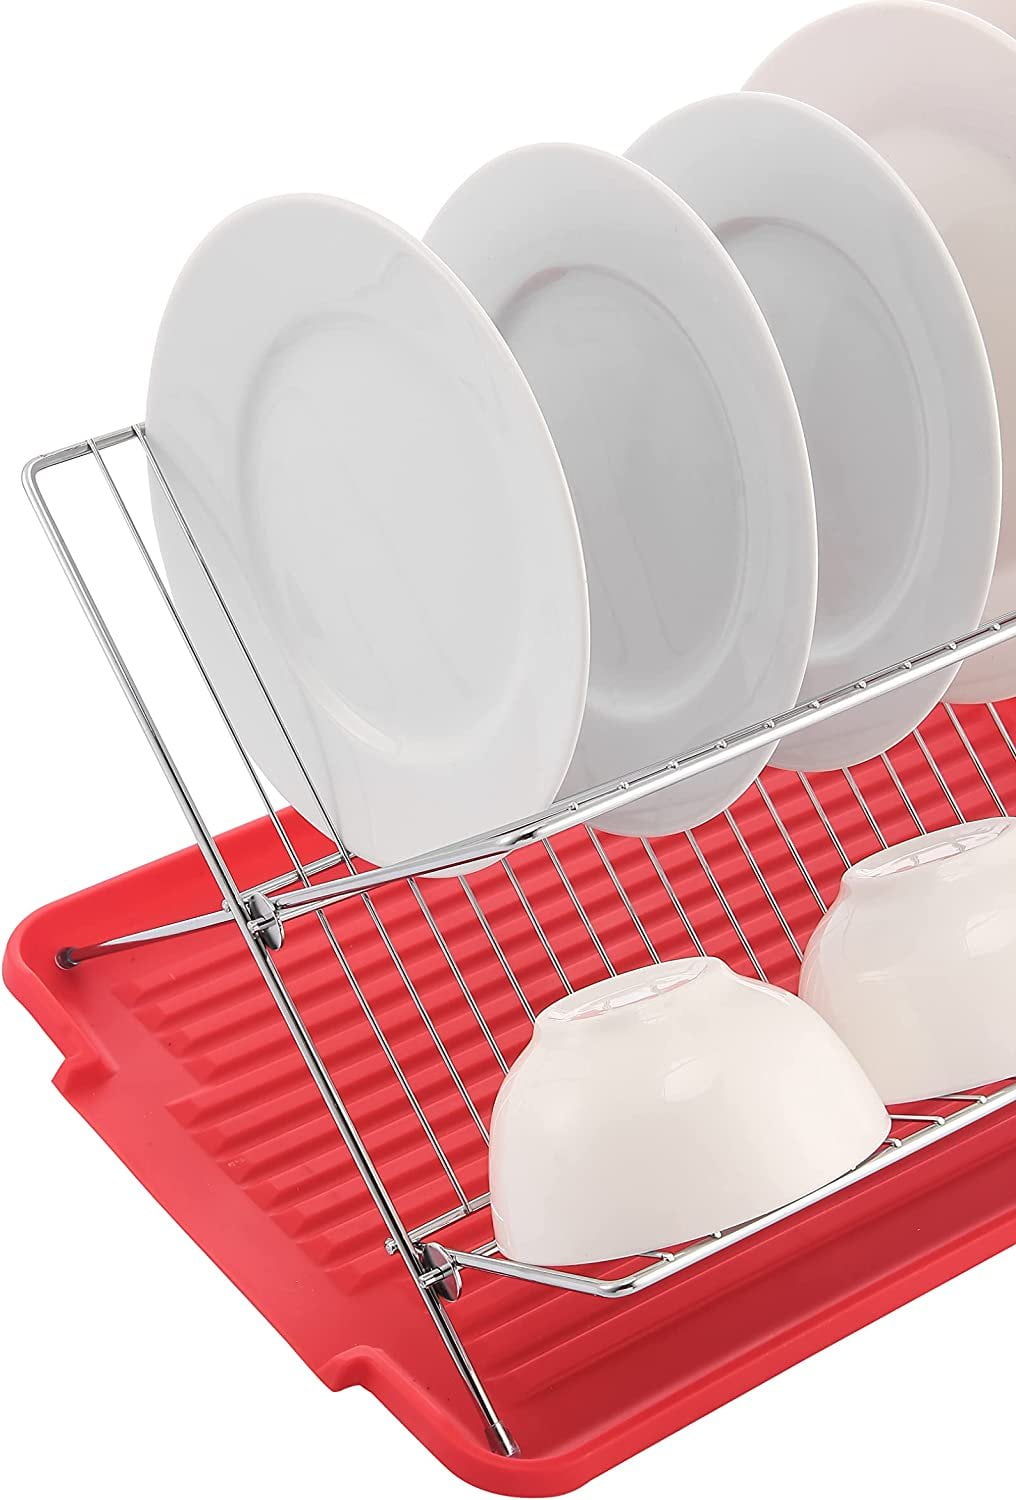 Jytue Collapsible Dish Drying Rack with Drainboard Tray Popup and